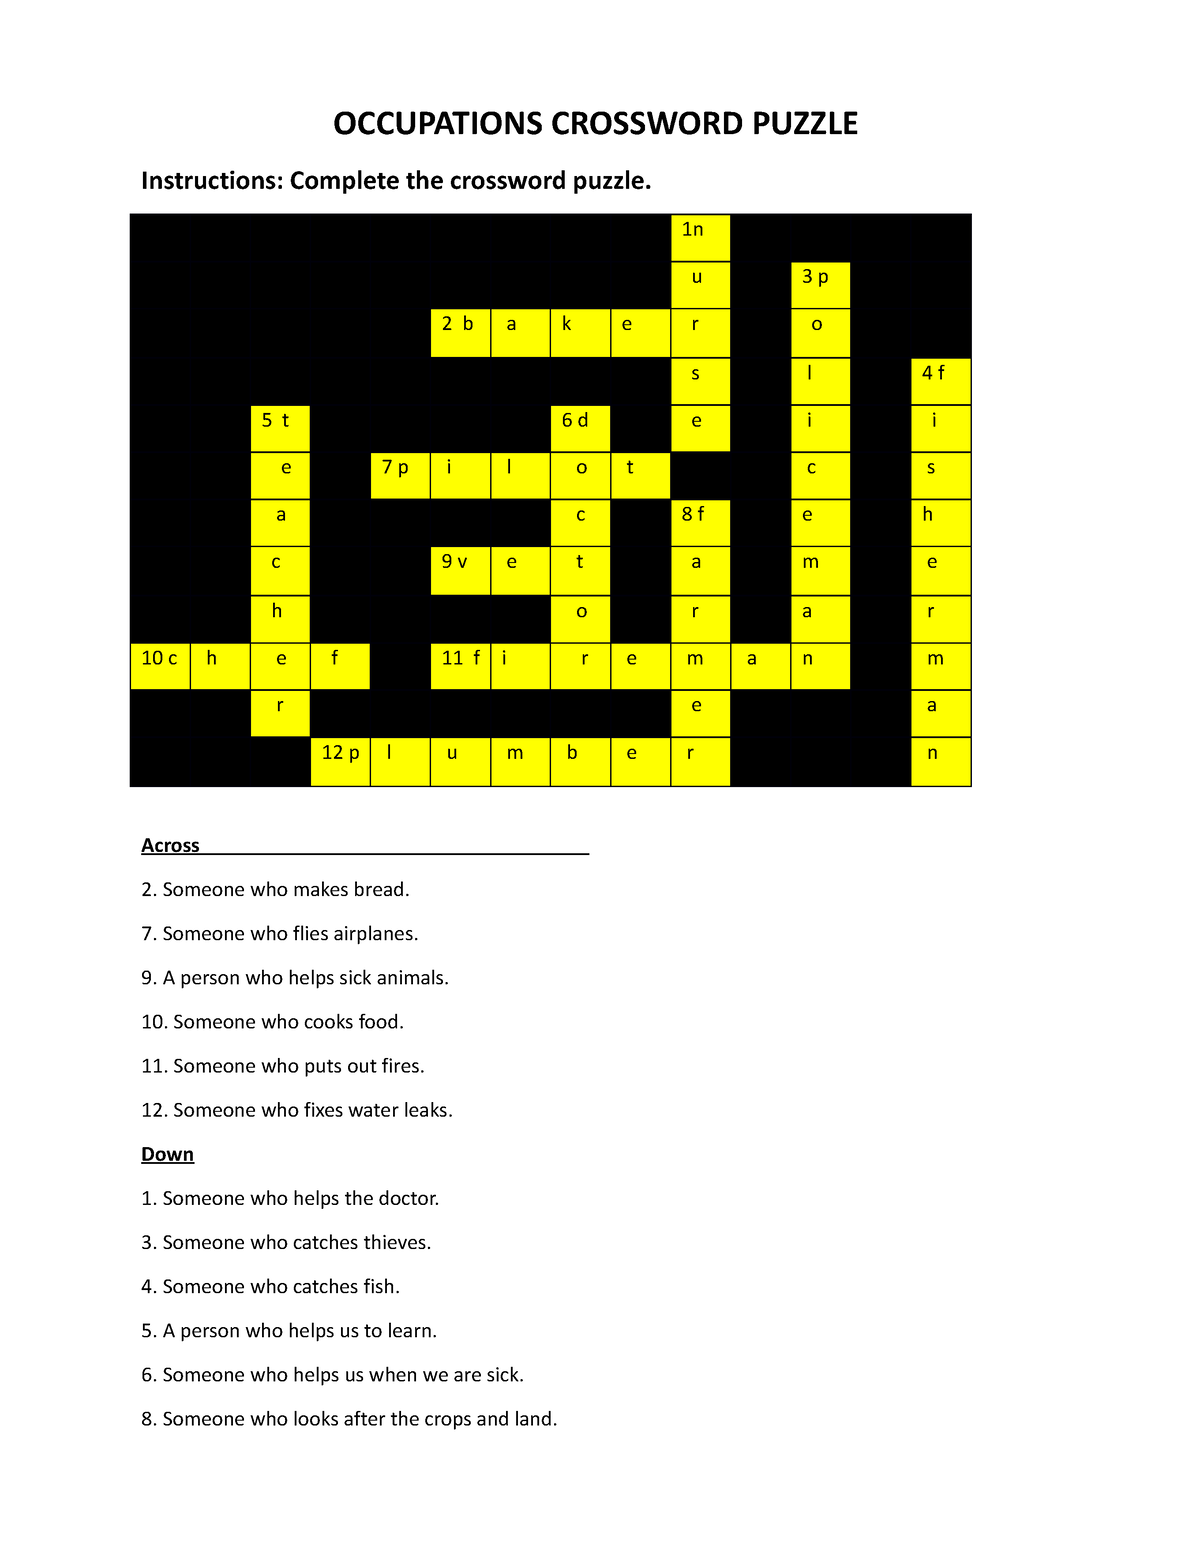 Jobs and occupations crossword puzzle OCCUPATIONS CROSSWORD PUZZLE